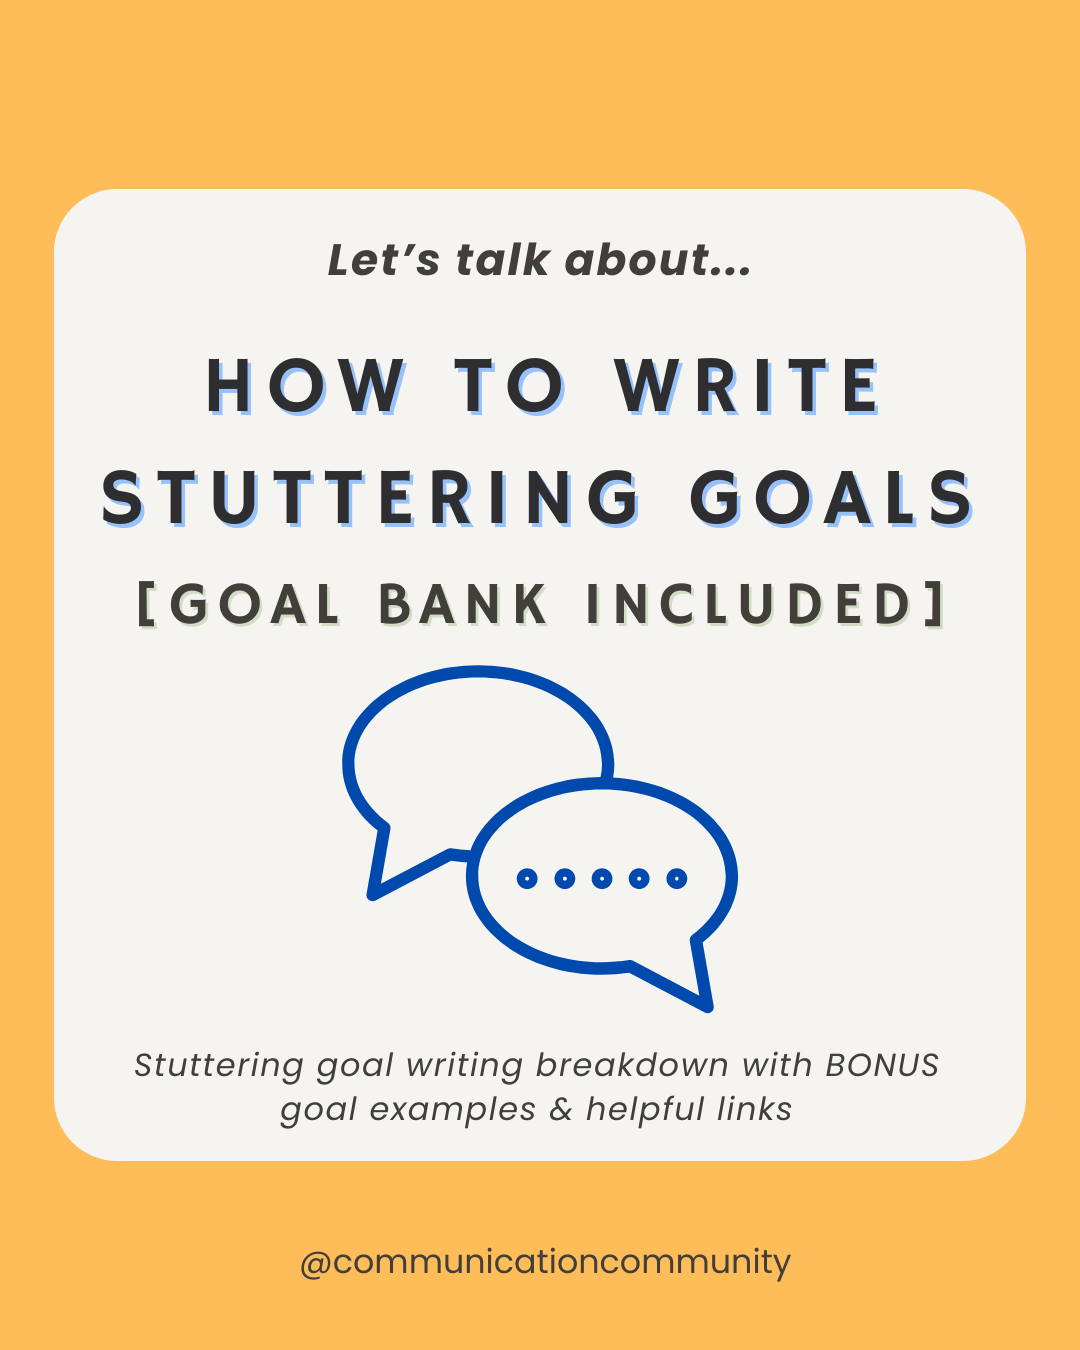 How to Write Stuttering Goals [with goal bank]